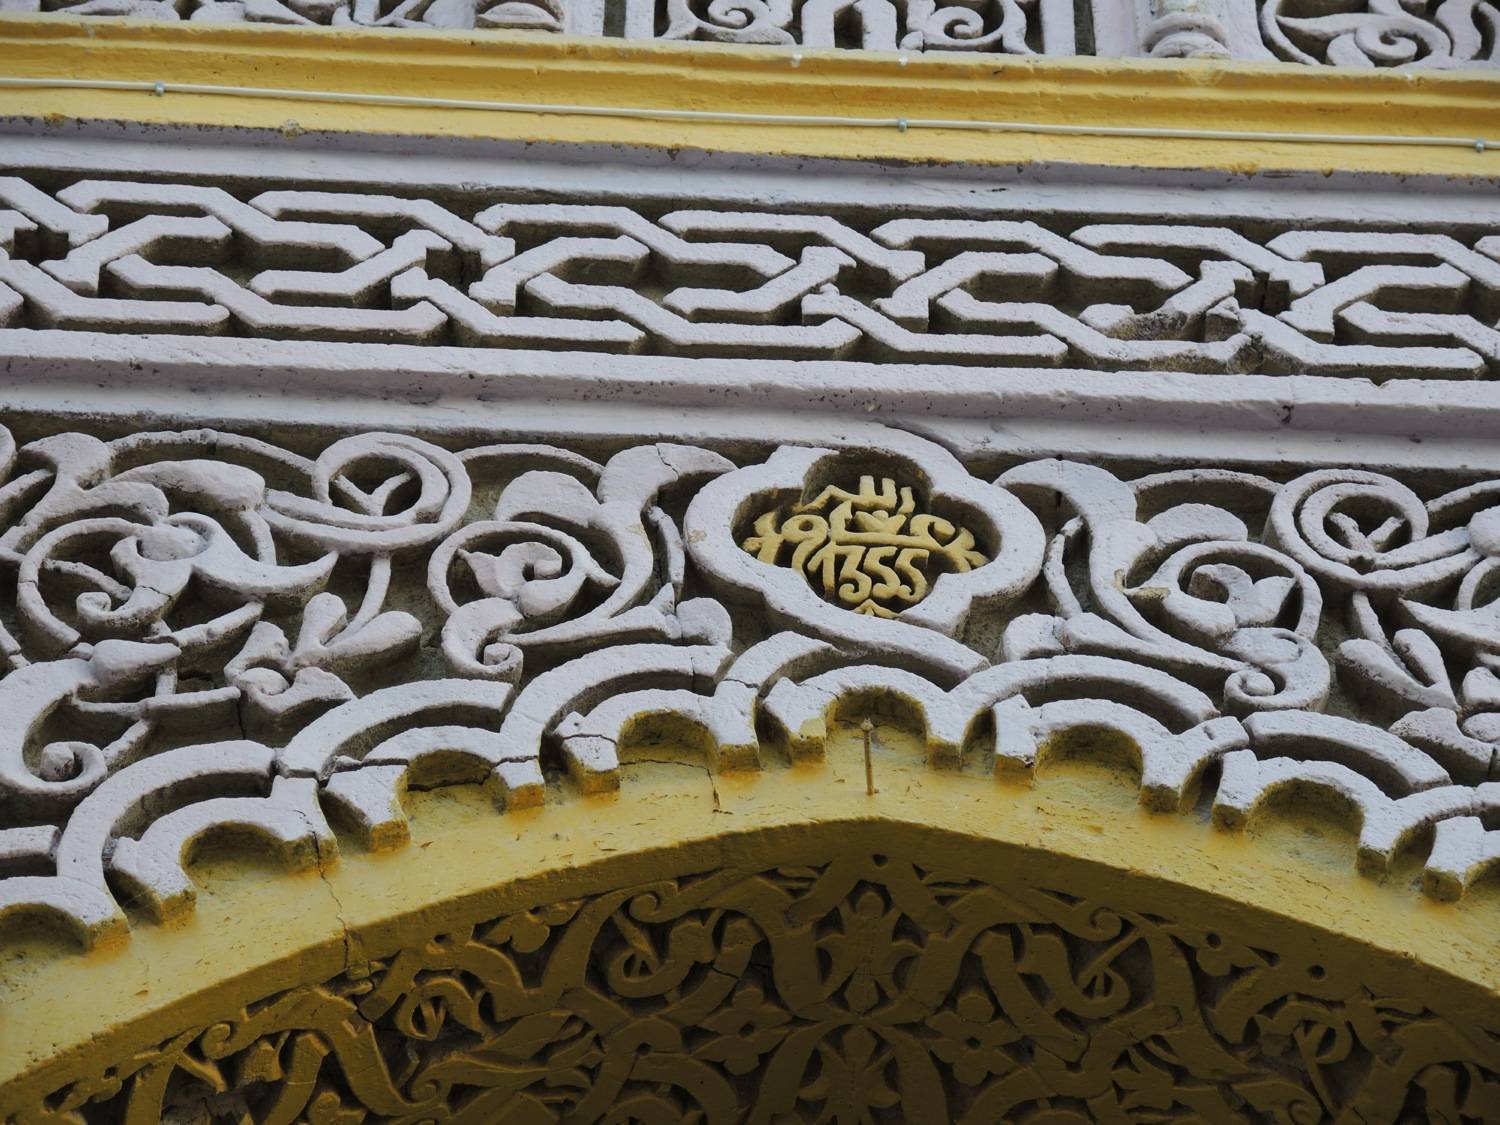 Detail view of the date in stucco above the main portal